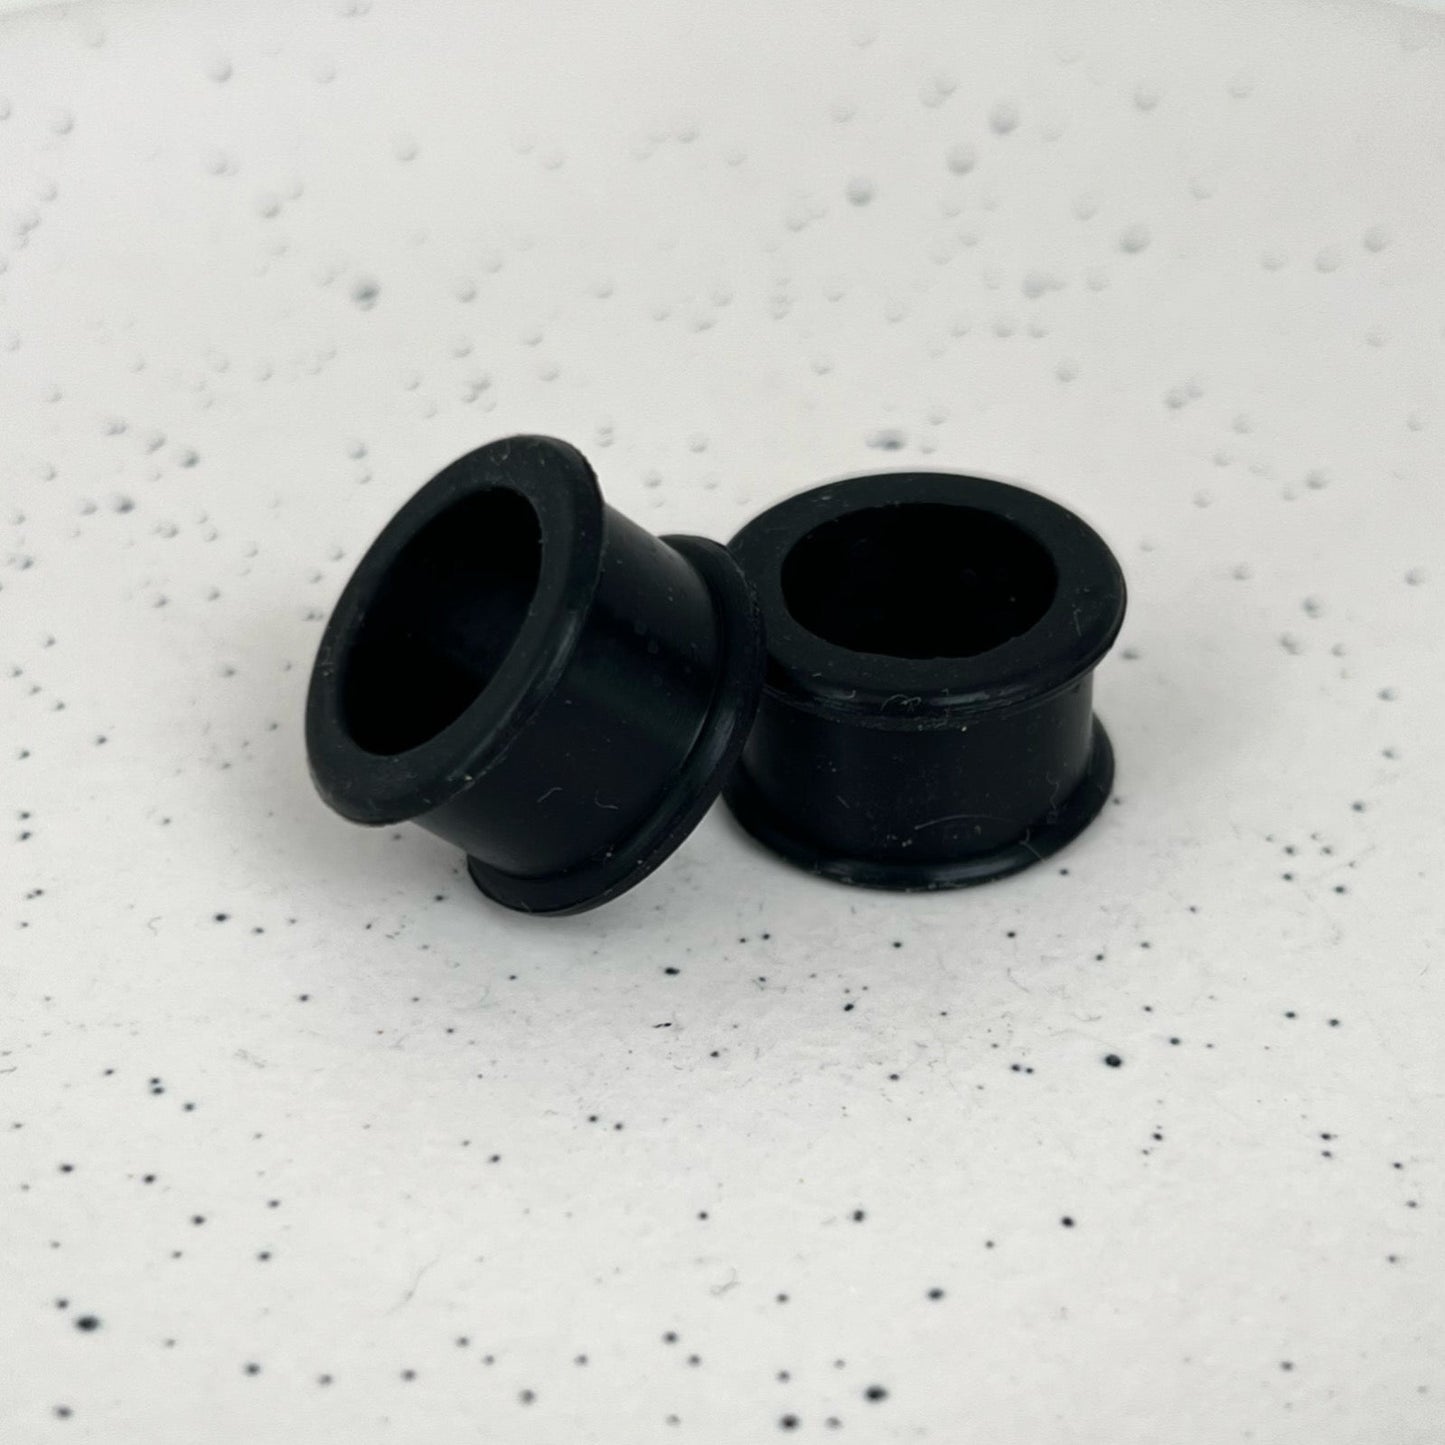 Skin Tone Flexible Silicone Ear Tunnels | Double Flare | 3mm-25mm